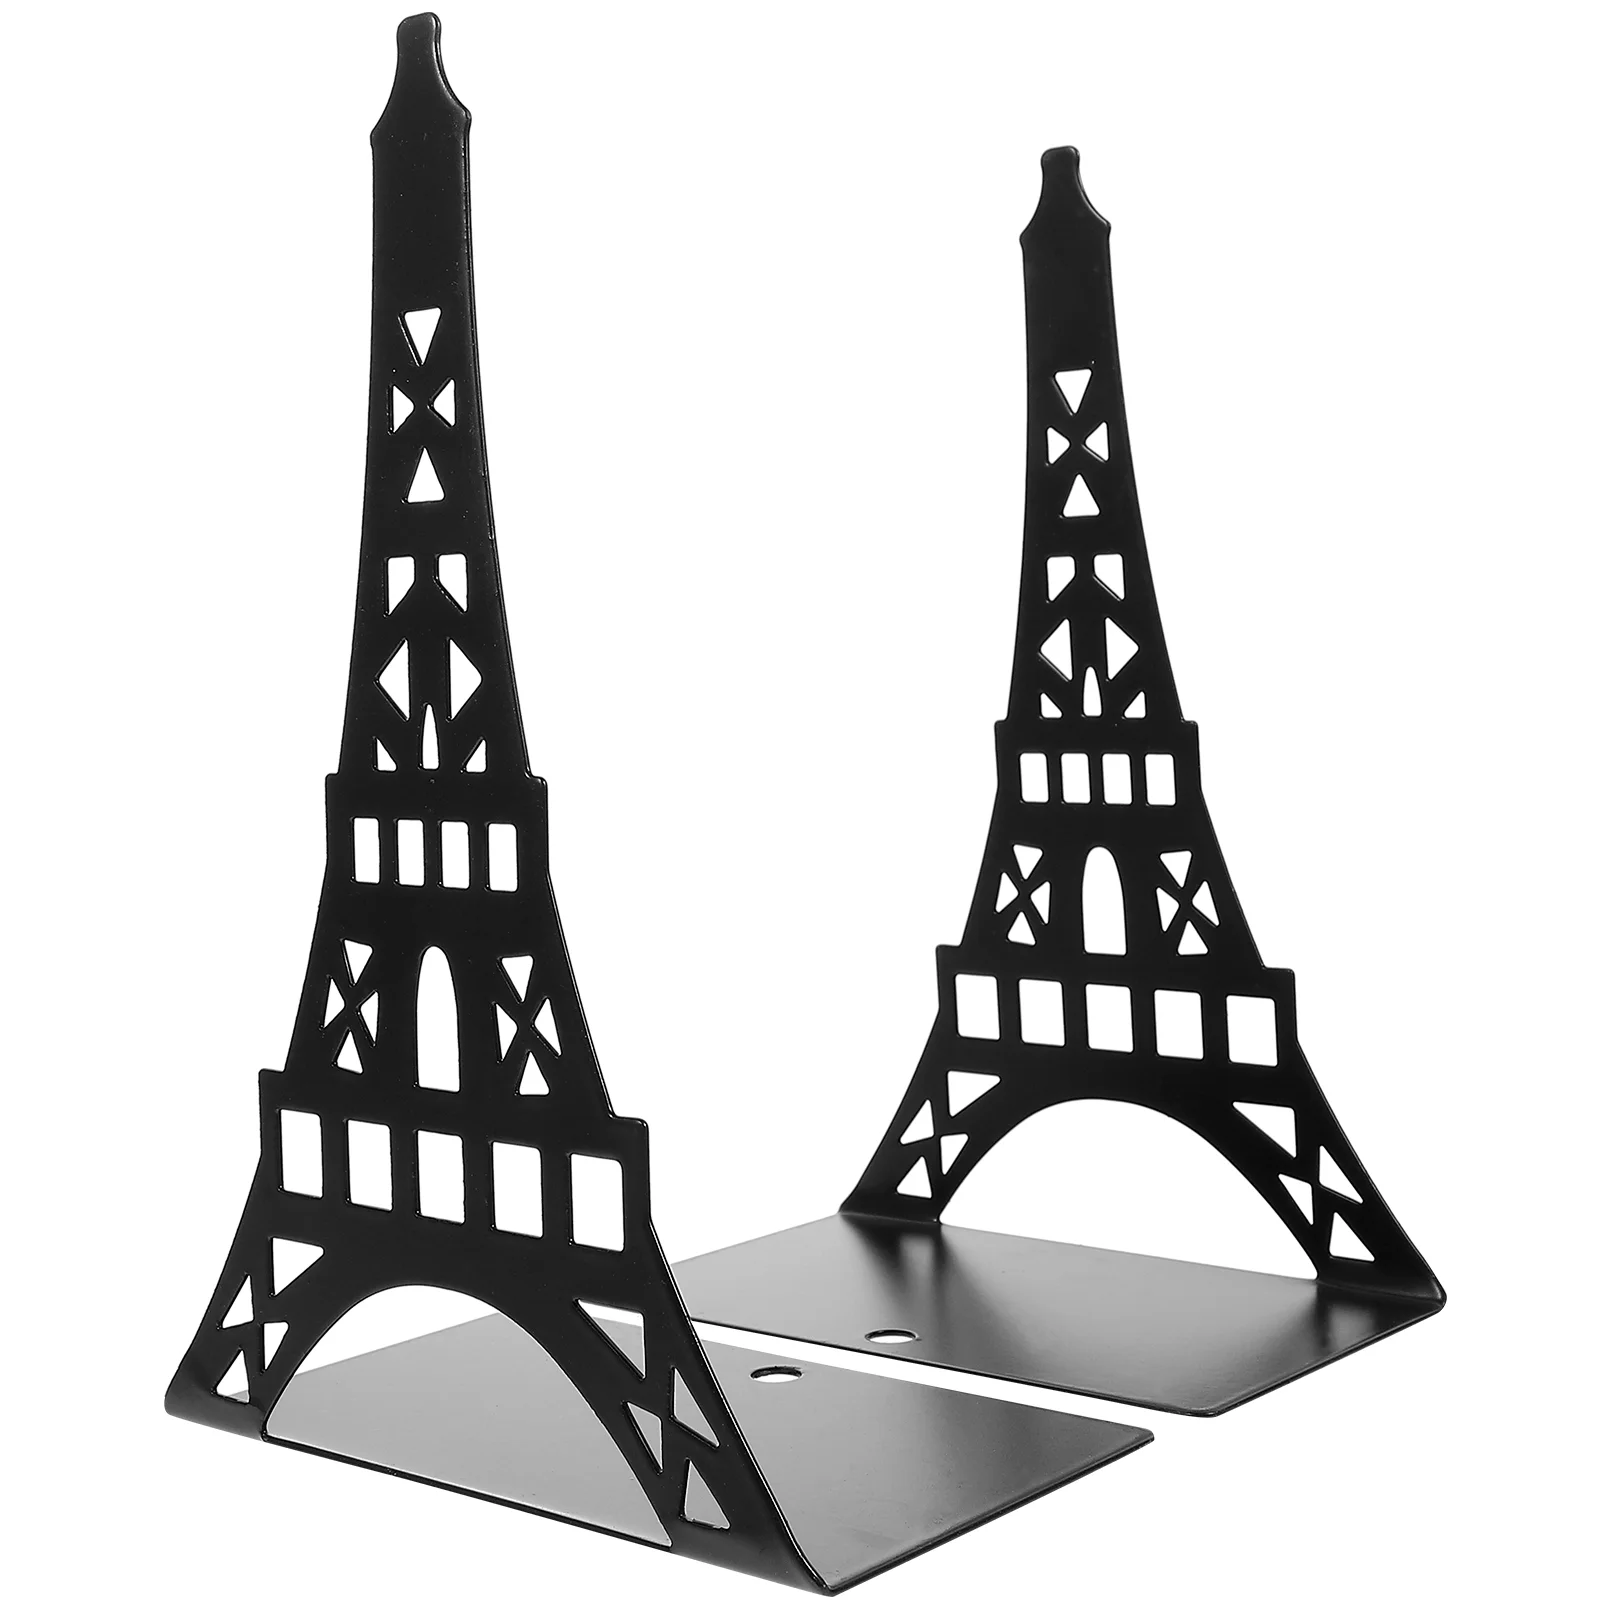 2Pcs Reusable Book Holders Tower Shape Book Holders Metal Book Ends File Book Organizer